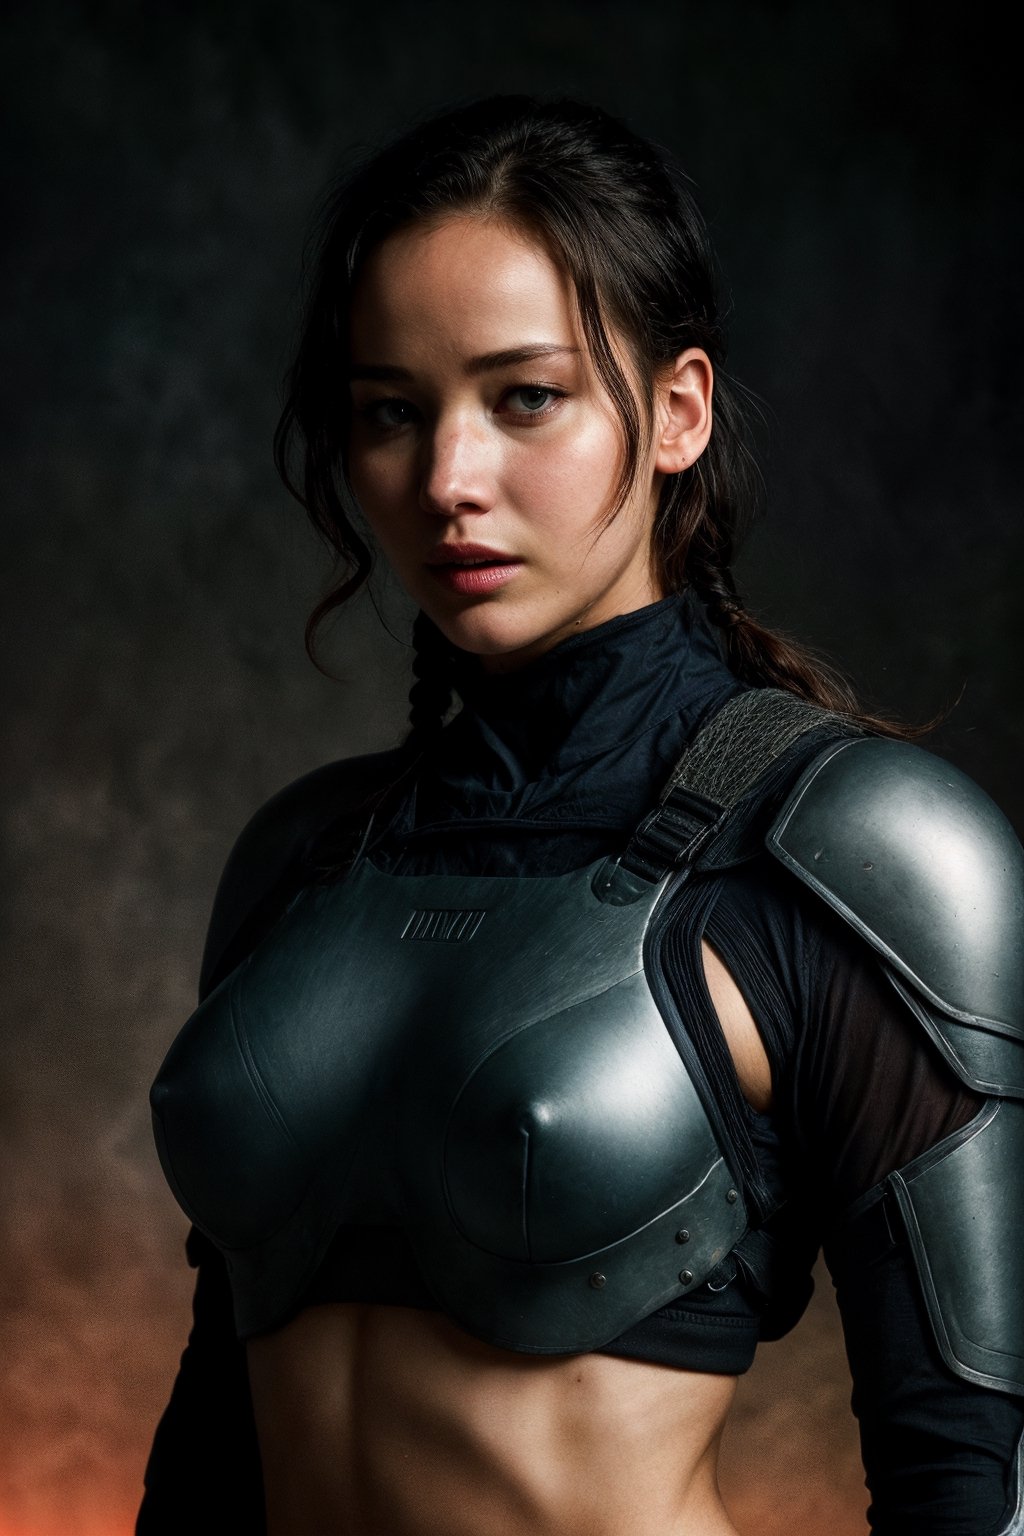 Jennifer Lawrence from the Hunger Game, breast cut clothes,big tits, colorful, darl background,black armor,holding a bow,green theme,exposure blend, medium shot, bokeh, (hdr:1.4), high contrast, (cinematic, teal and orange:0.85), (muted colors, dim colors, soothing tones:1.3), low saturation,realistic